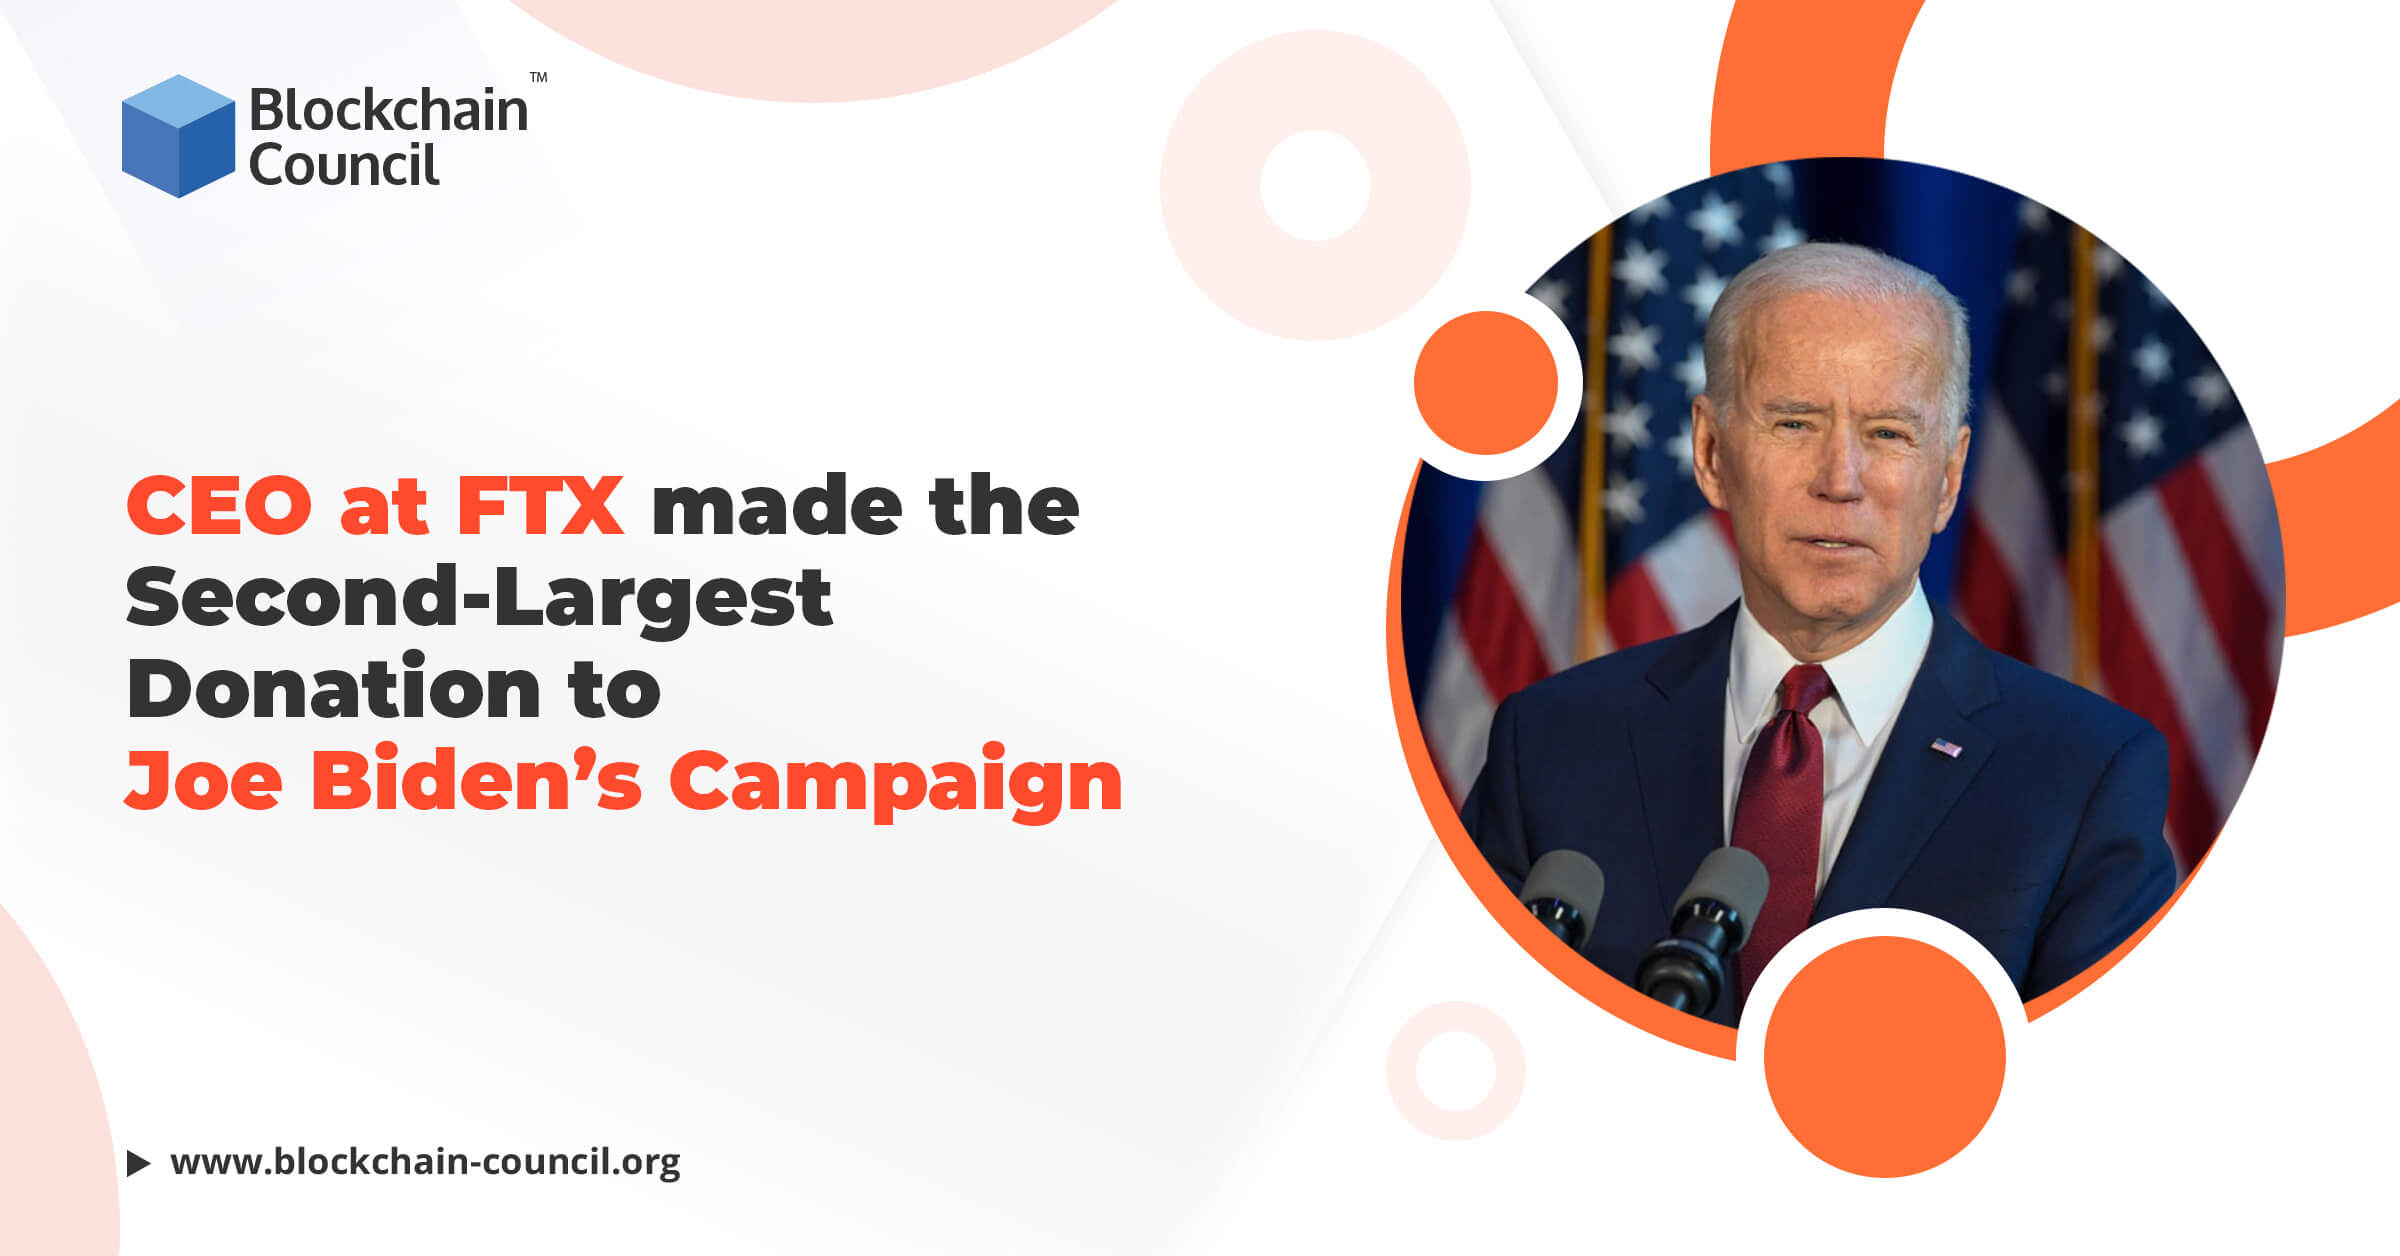 CEO at FTX Made the Second-Largest Donation to Joe Biden’s Campaign